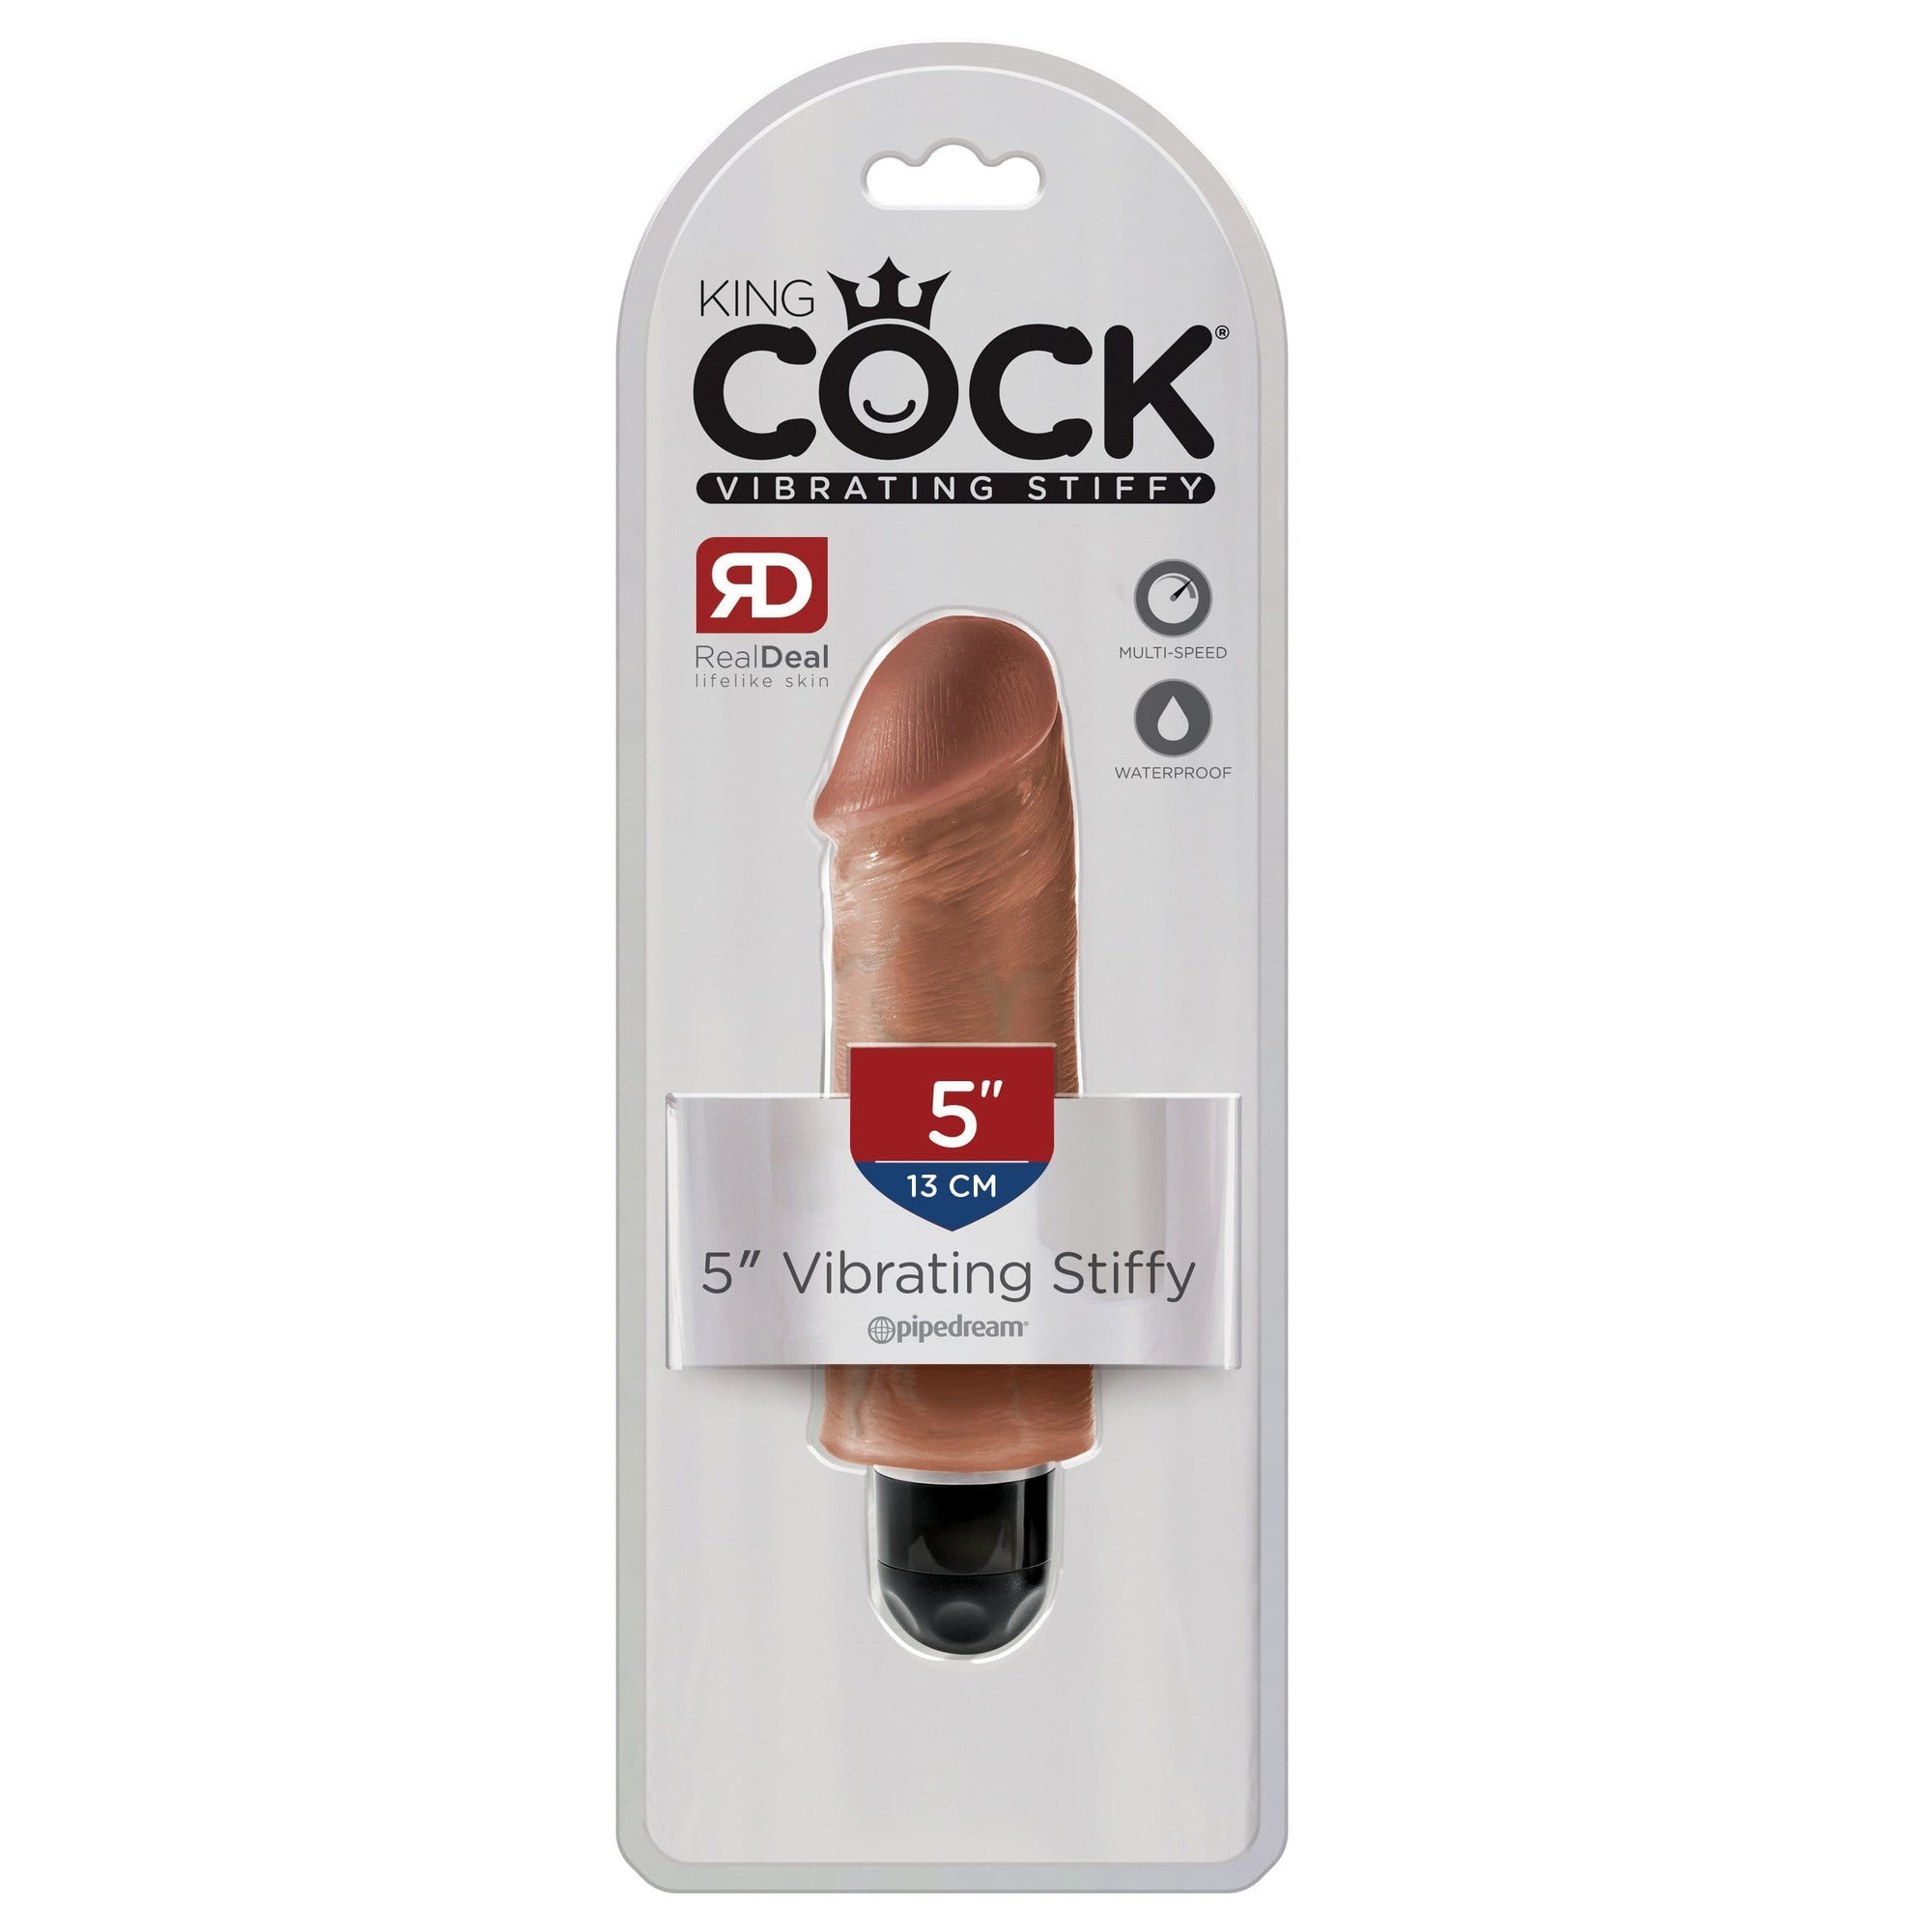 Pipedream - King Cock Vibrating Stiffy Dildo 5" (Tan) Realistic Dildo w/o suction cup (Vibration) Non Rechargeable 319767073 CherryAffairs